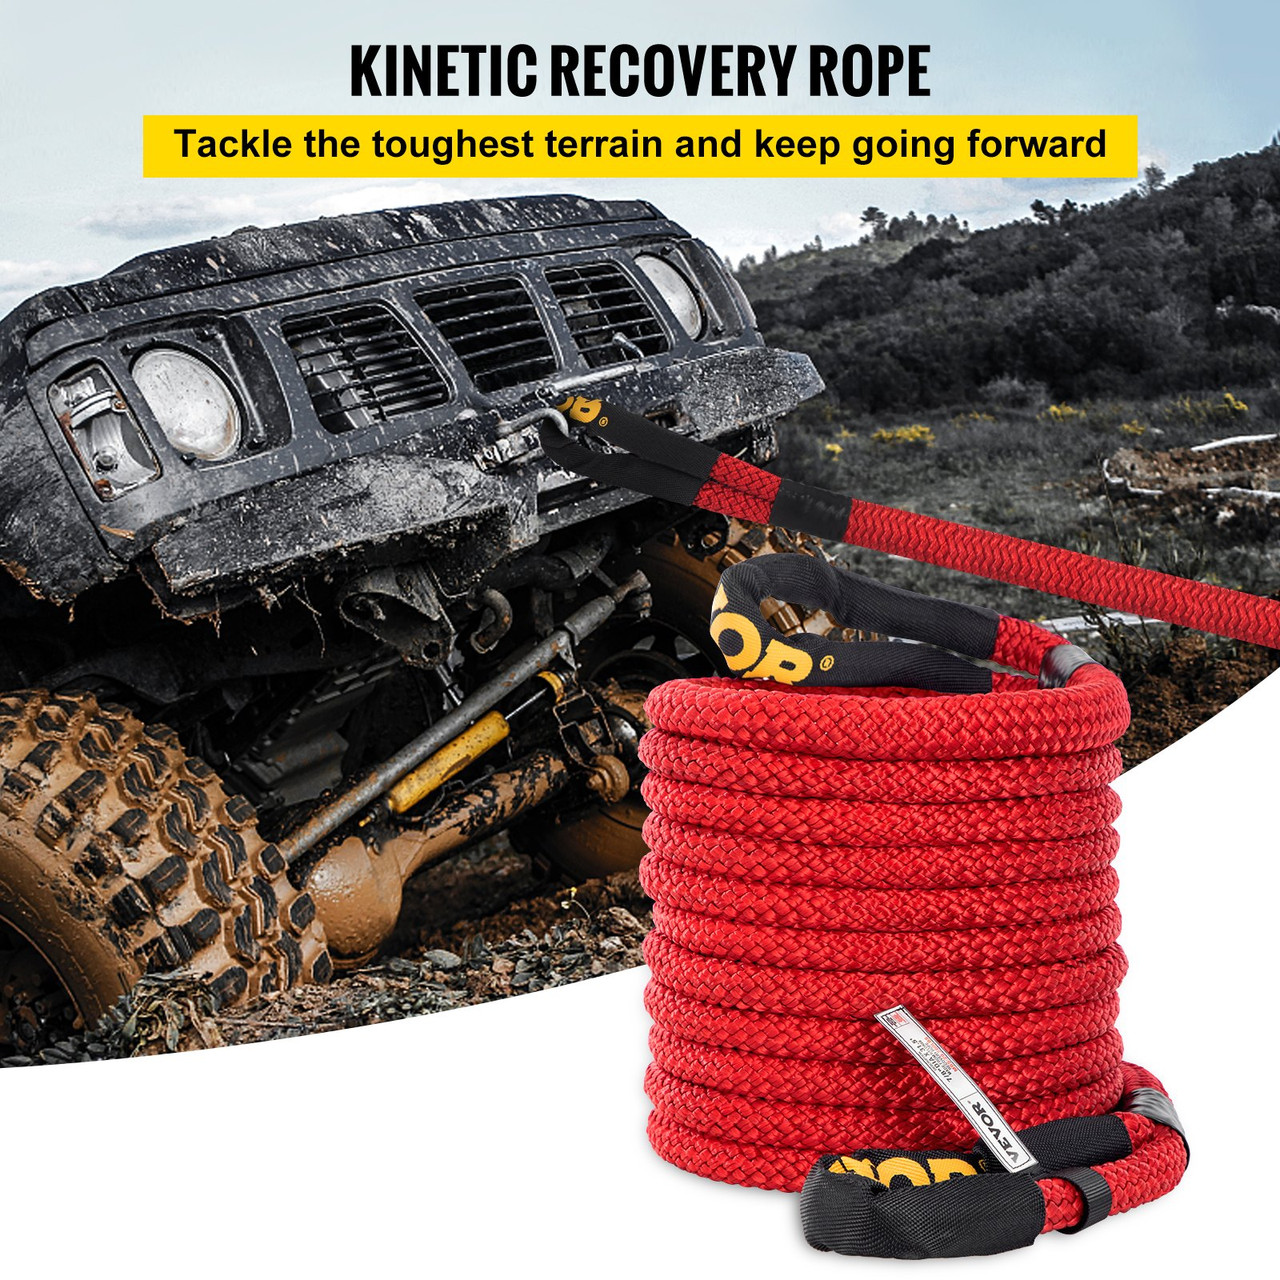 7/8" x 31.5' Kinetic Recovery Rope, 29,300 lbs, Heavy Duty Nylon Double Braided Kinetic Energy Rope w/ Loops and Protective Sleeves, for Truck Off-Road Vehicle ATV UTV, Carry Bag Included, Red